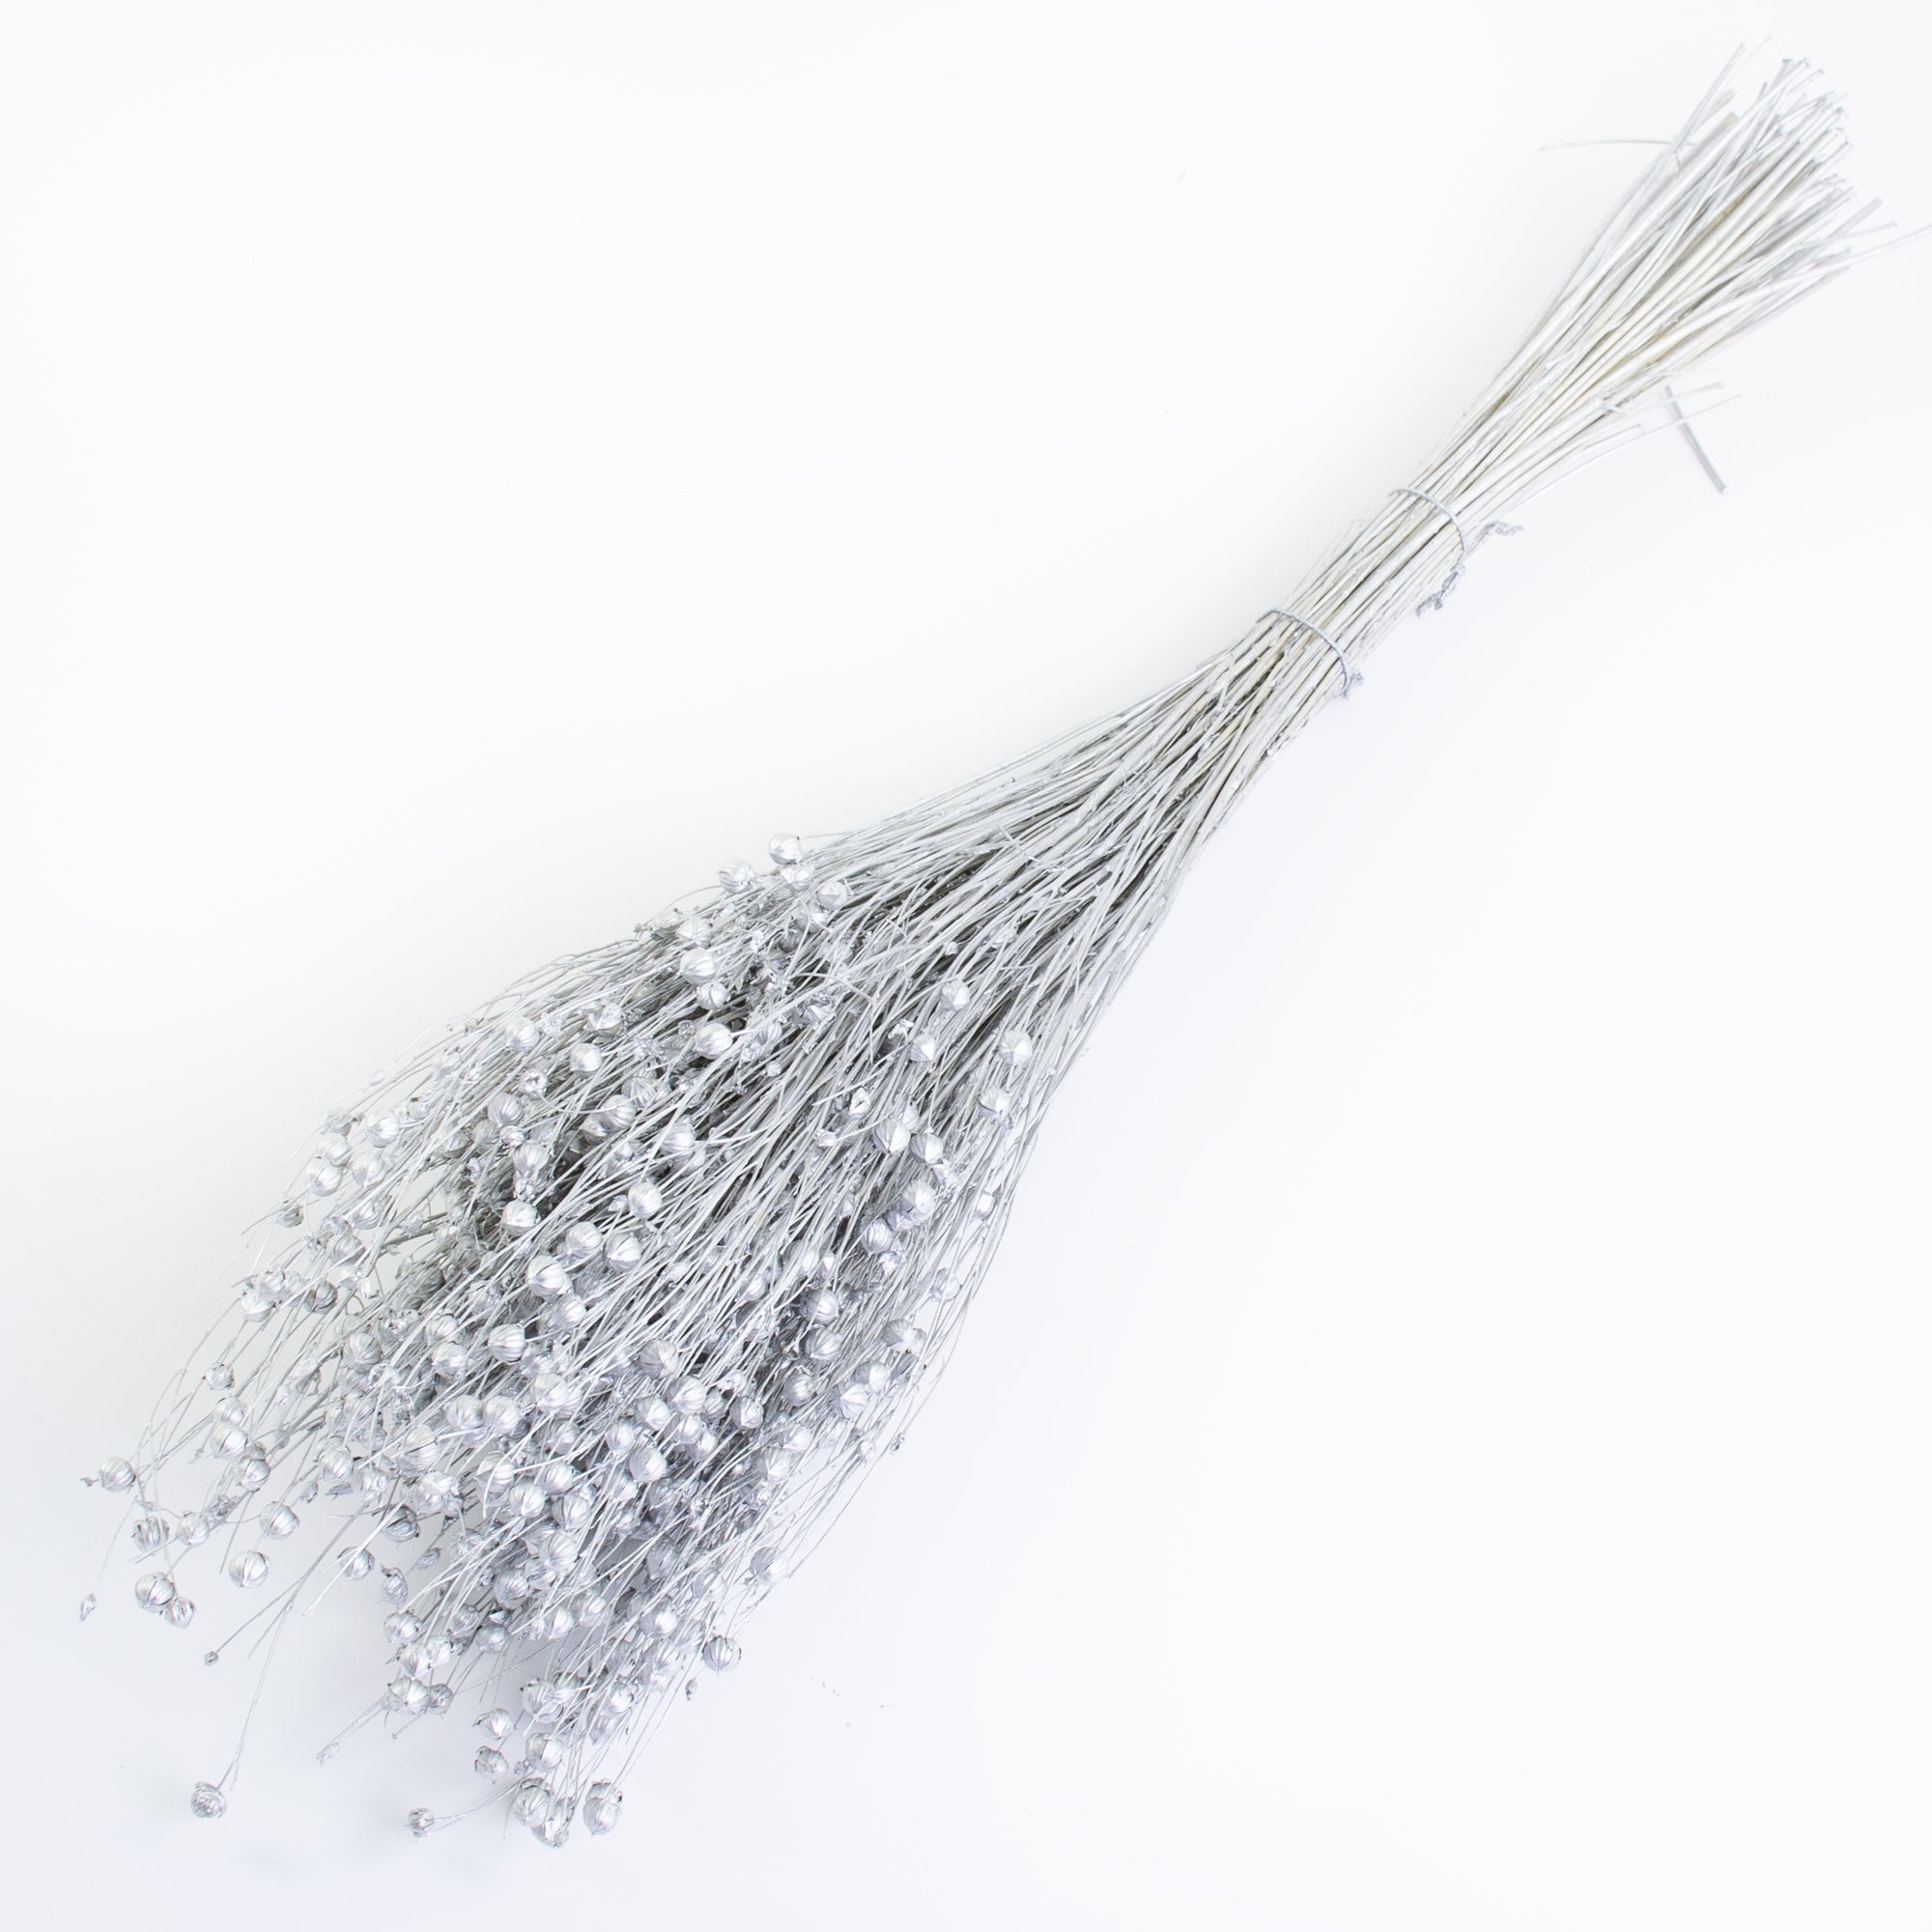 This image shows a bunch of silver linum, or flax, against a white background